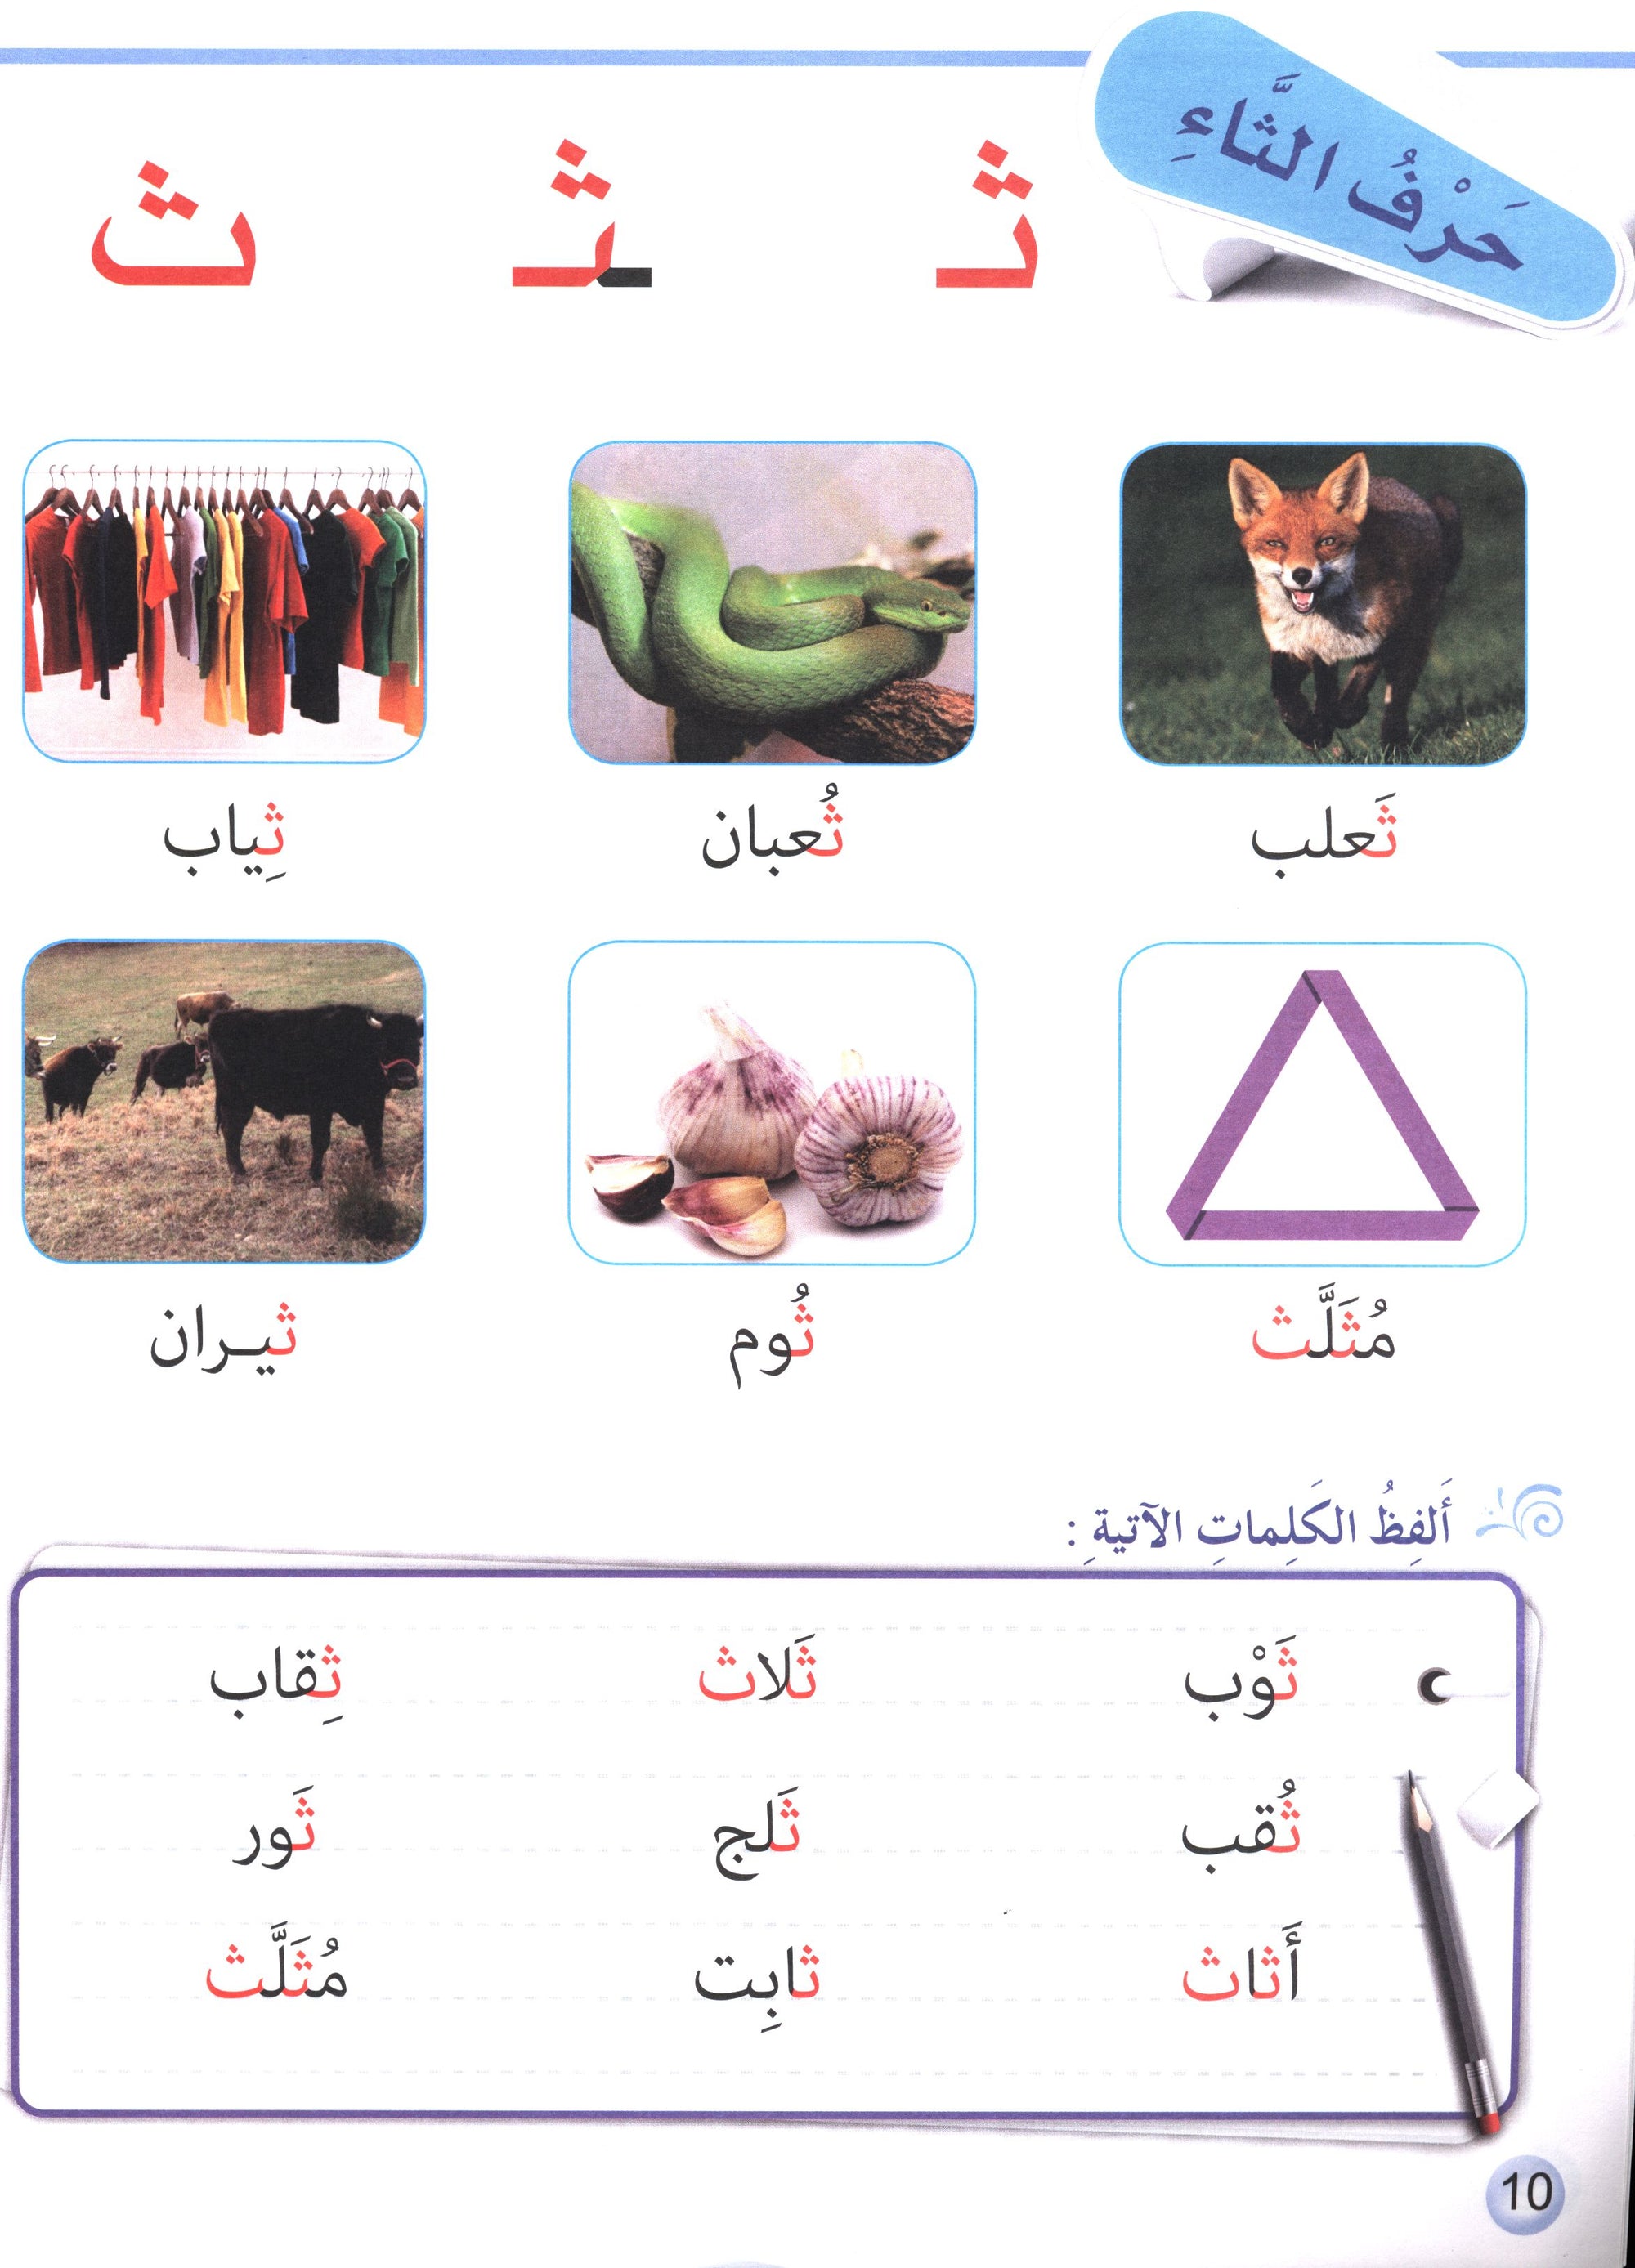 I Love My Language with CD Textbook Level 1 أحبُّ لغتي